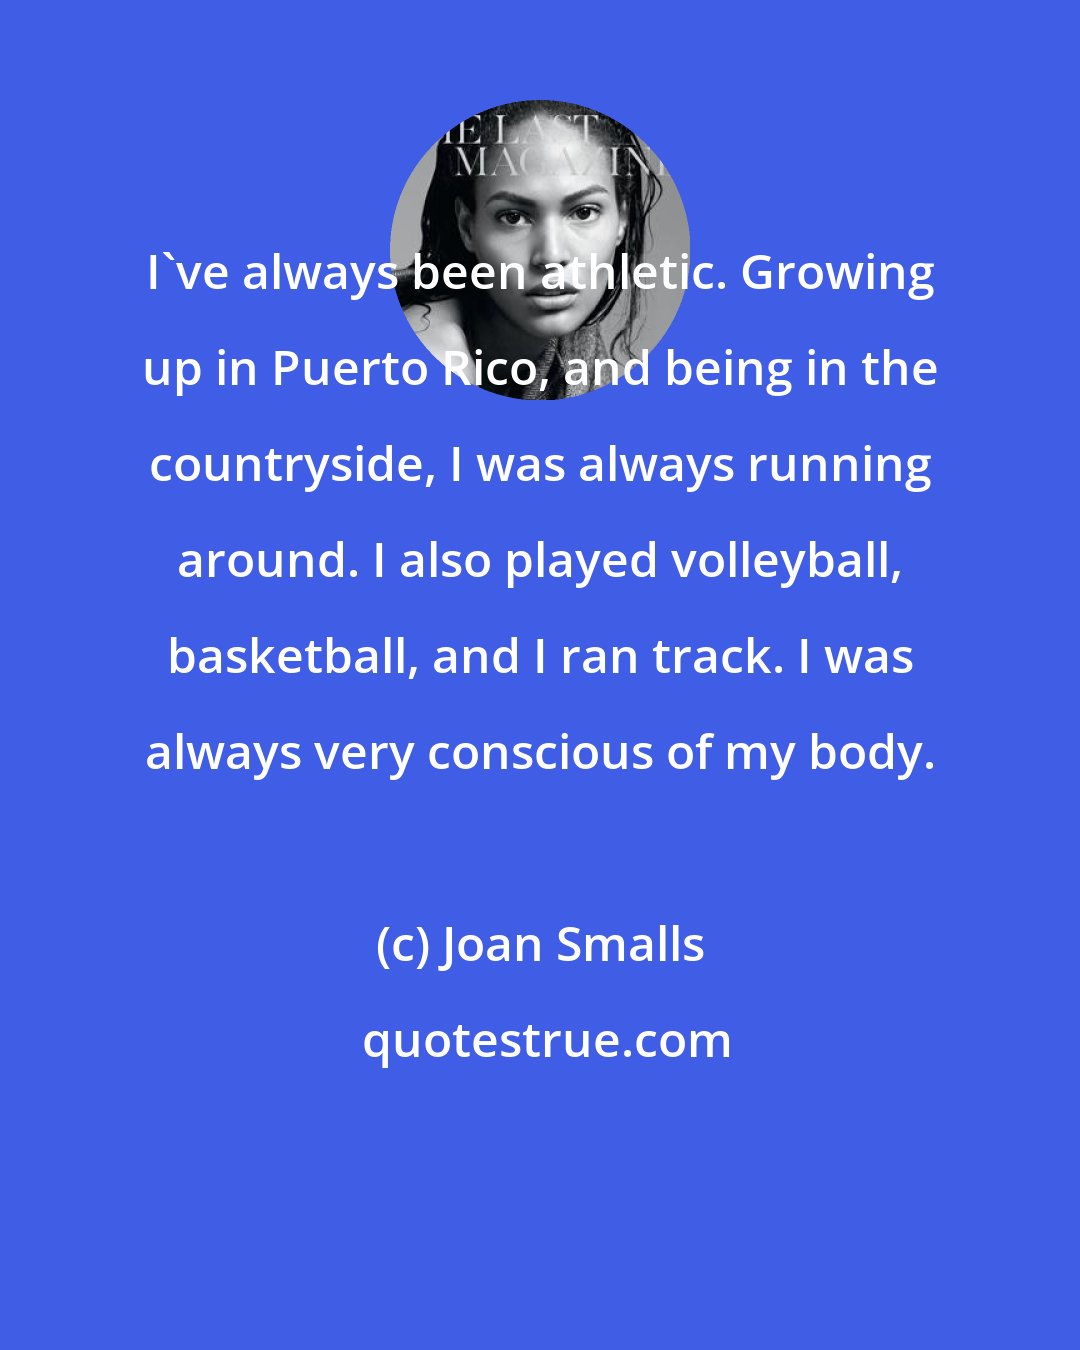 Joan Smalls: I've always been athletic. Growing up in Puerto Rico, and being in the countryside, I was always running around. I also played volleyball, basketball, and I ran track. I was always very conscious of my body.